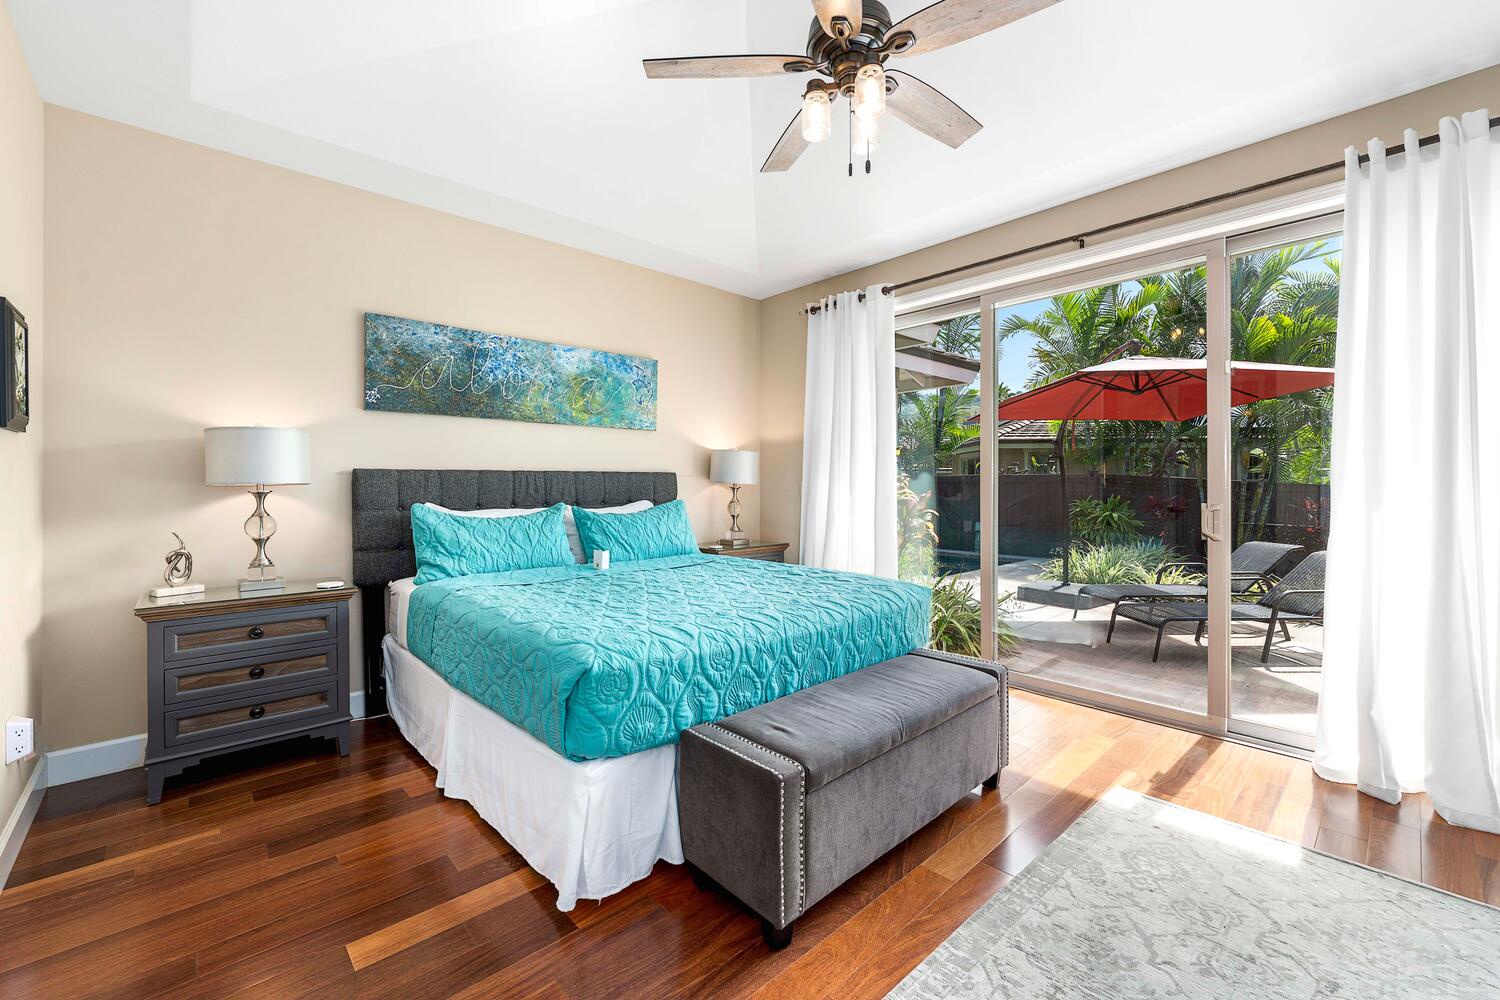 Kailua Kona Vacation Rentals, Holua Kai #32 - The sumptuous primary suite offers a king-size bed, a garden and pool view.